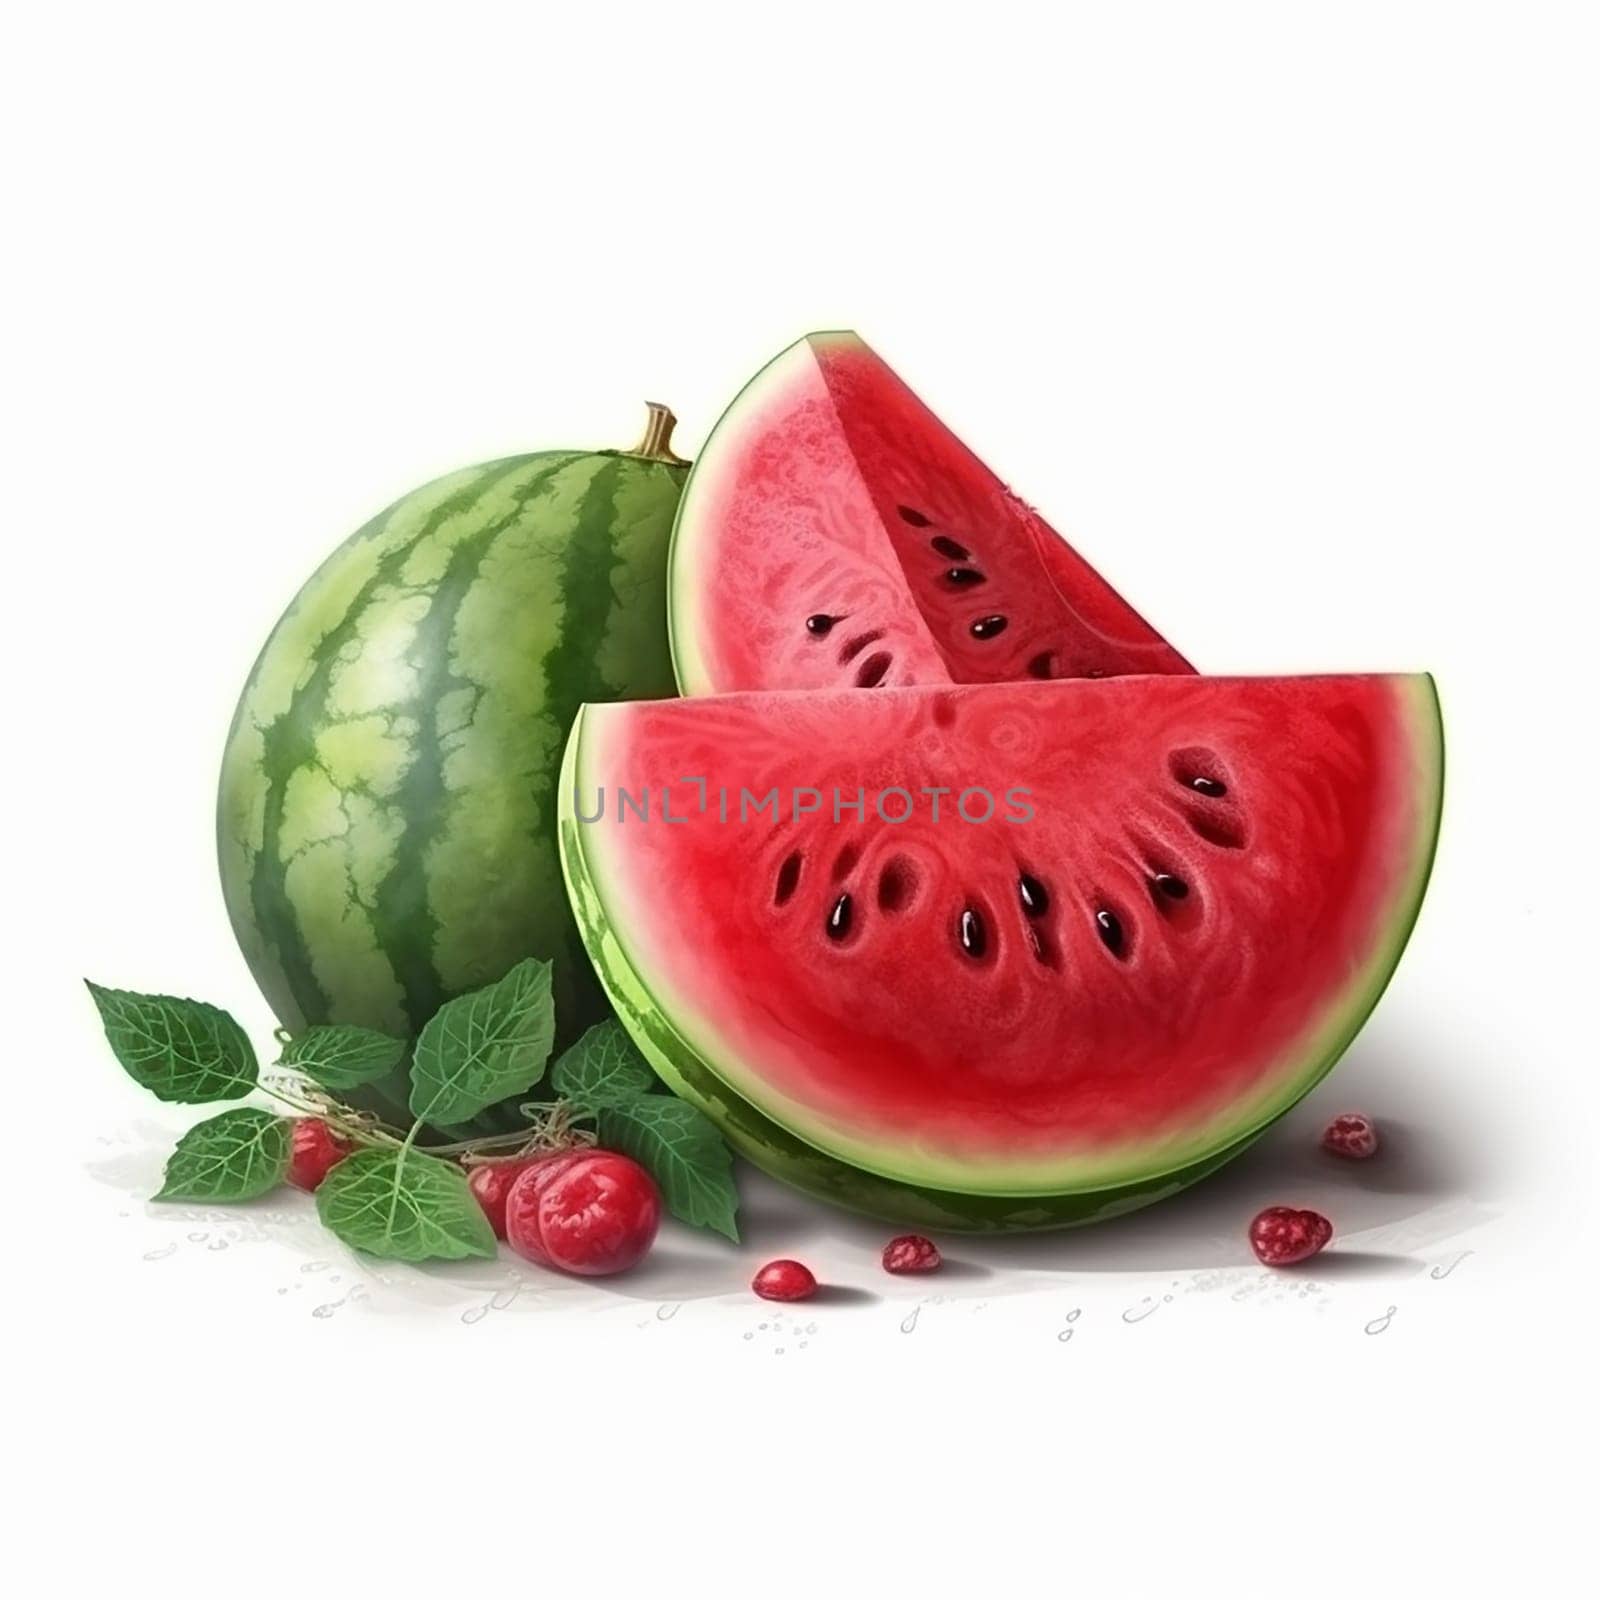 A realistic illustration of a whole watermelon with a sliced piece.